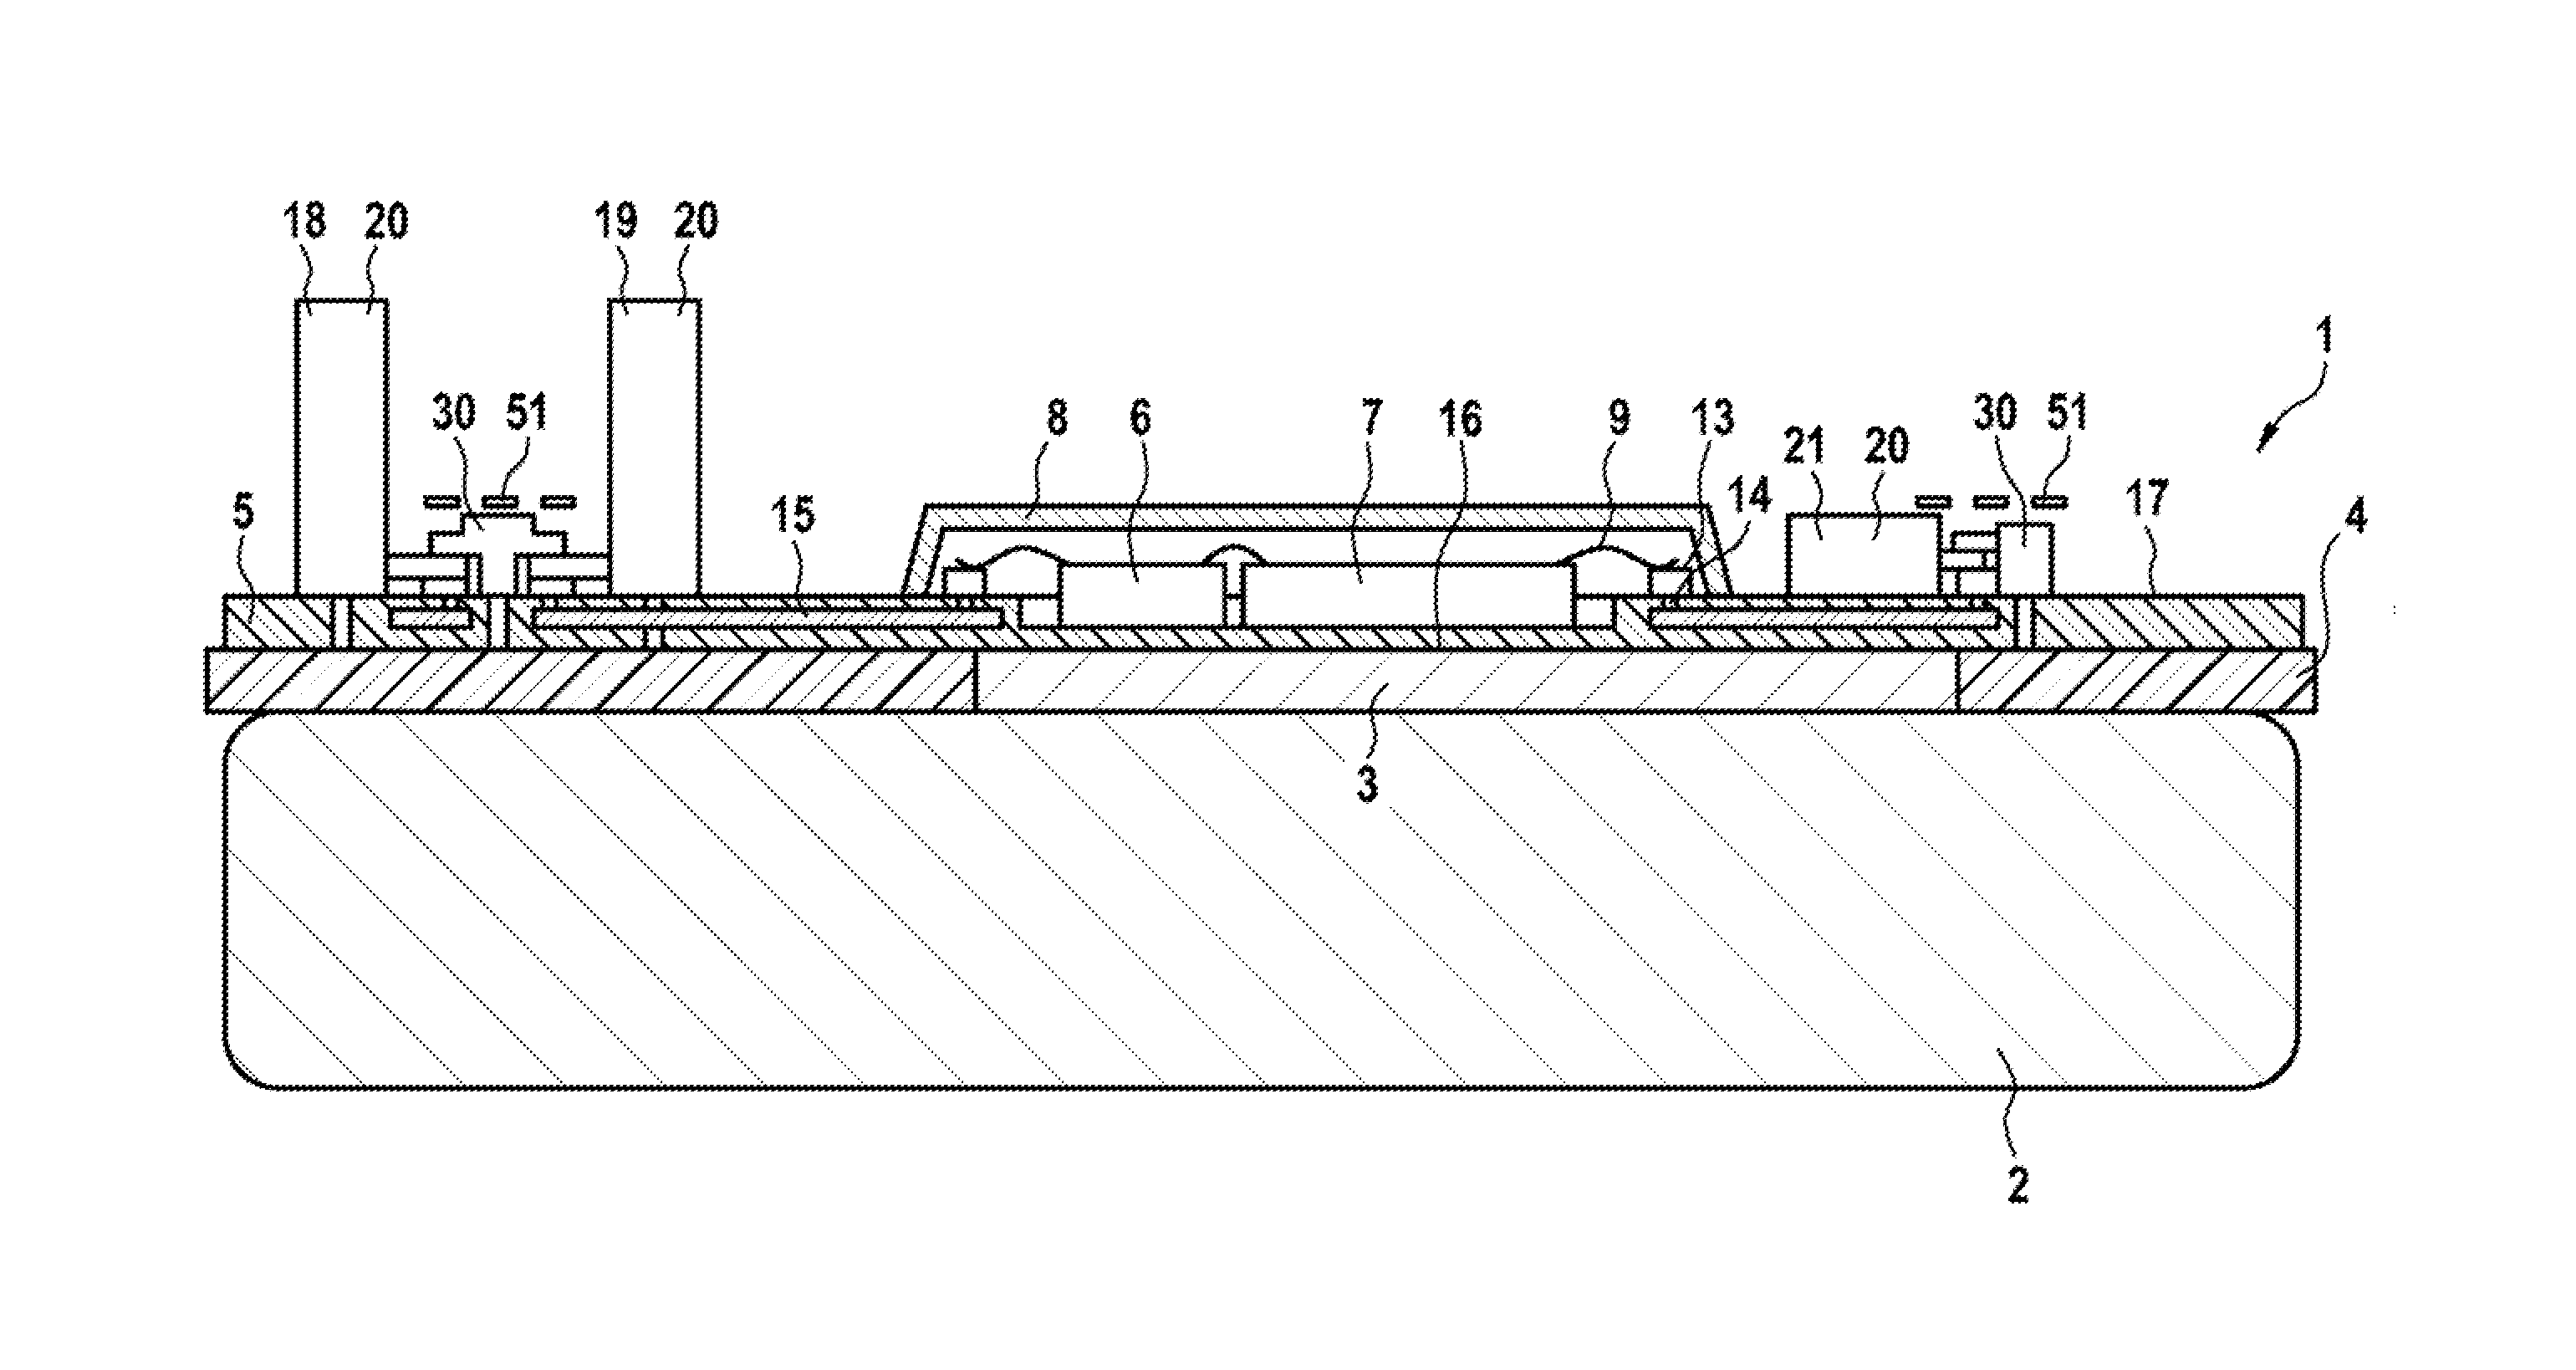 Electronic Control Module and Method for Producing an Electronic Control Module